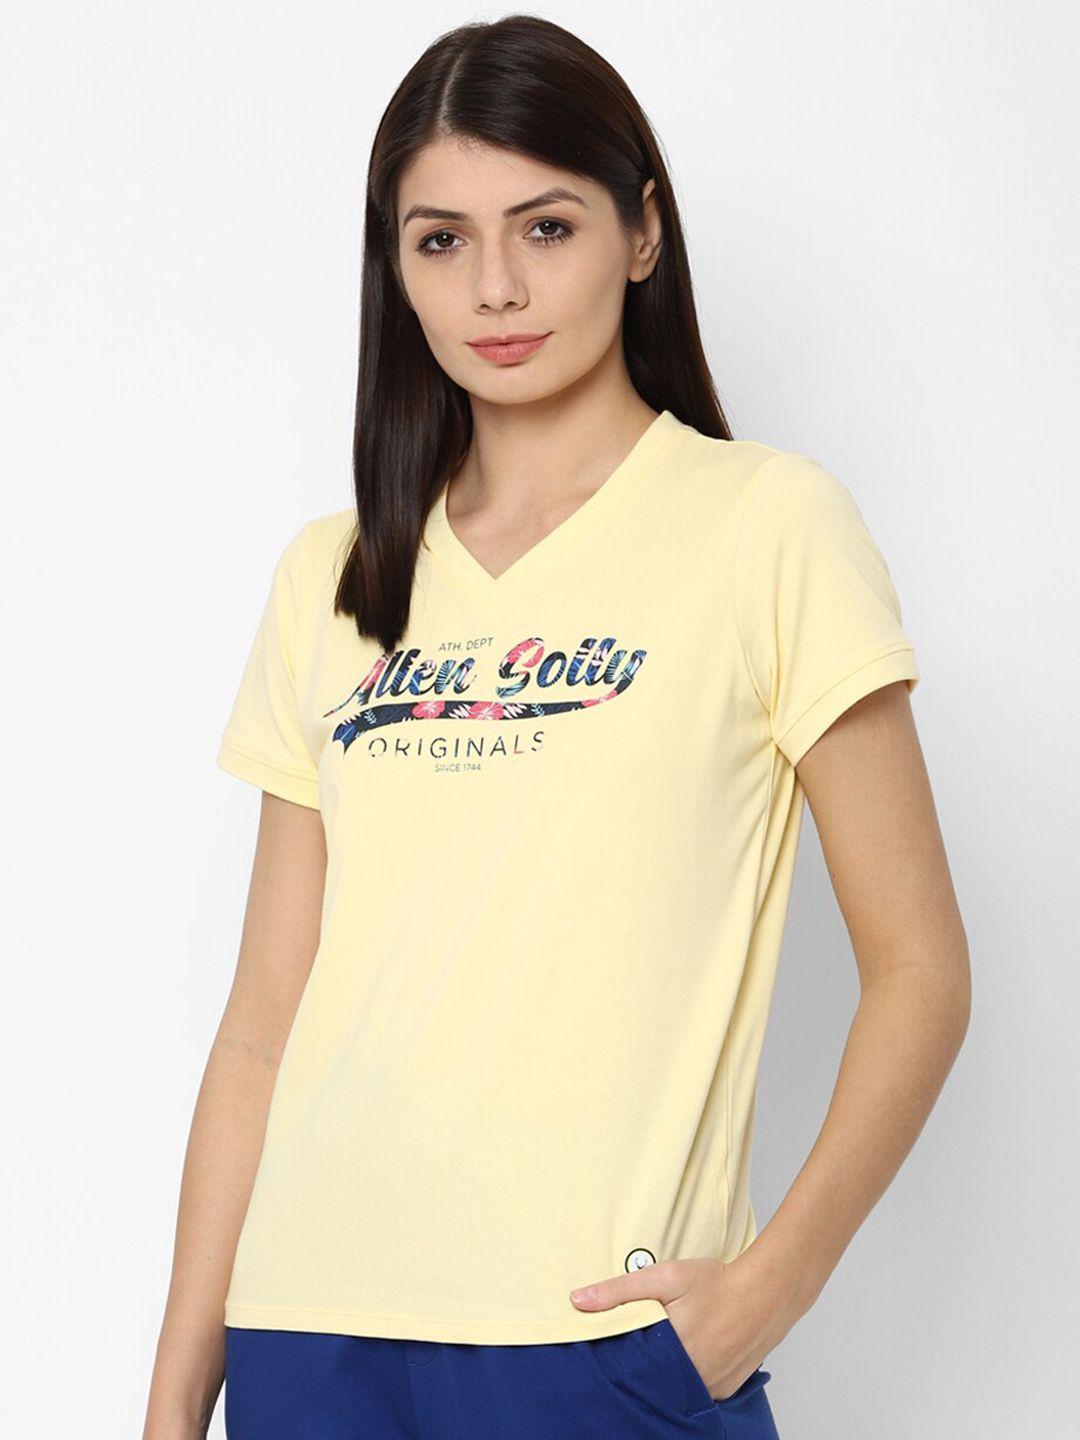 allen solly woman yellow typography v-neck t-shirt